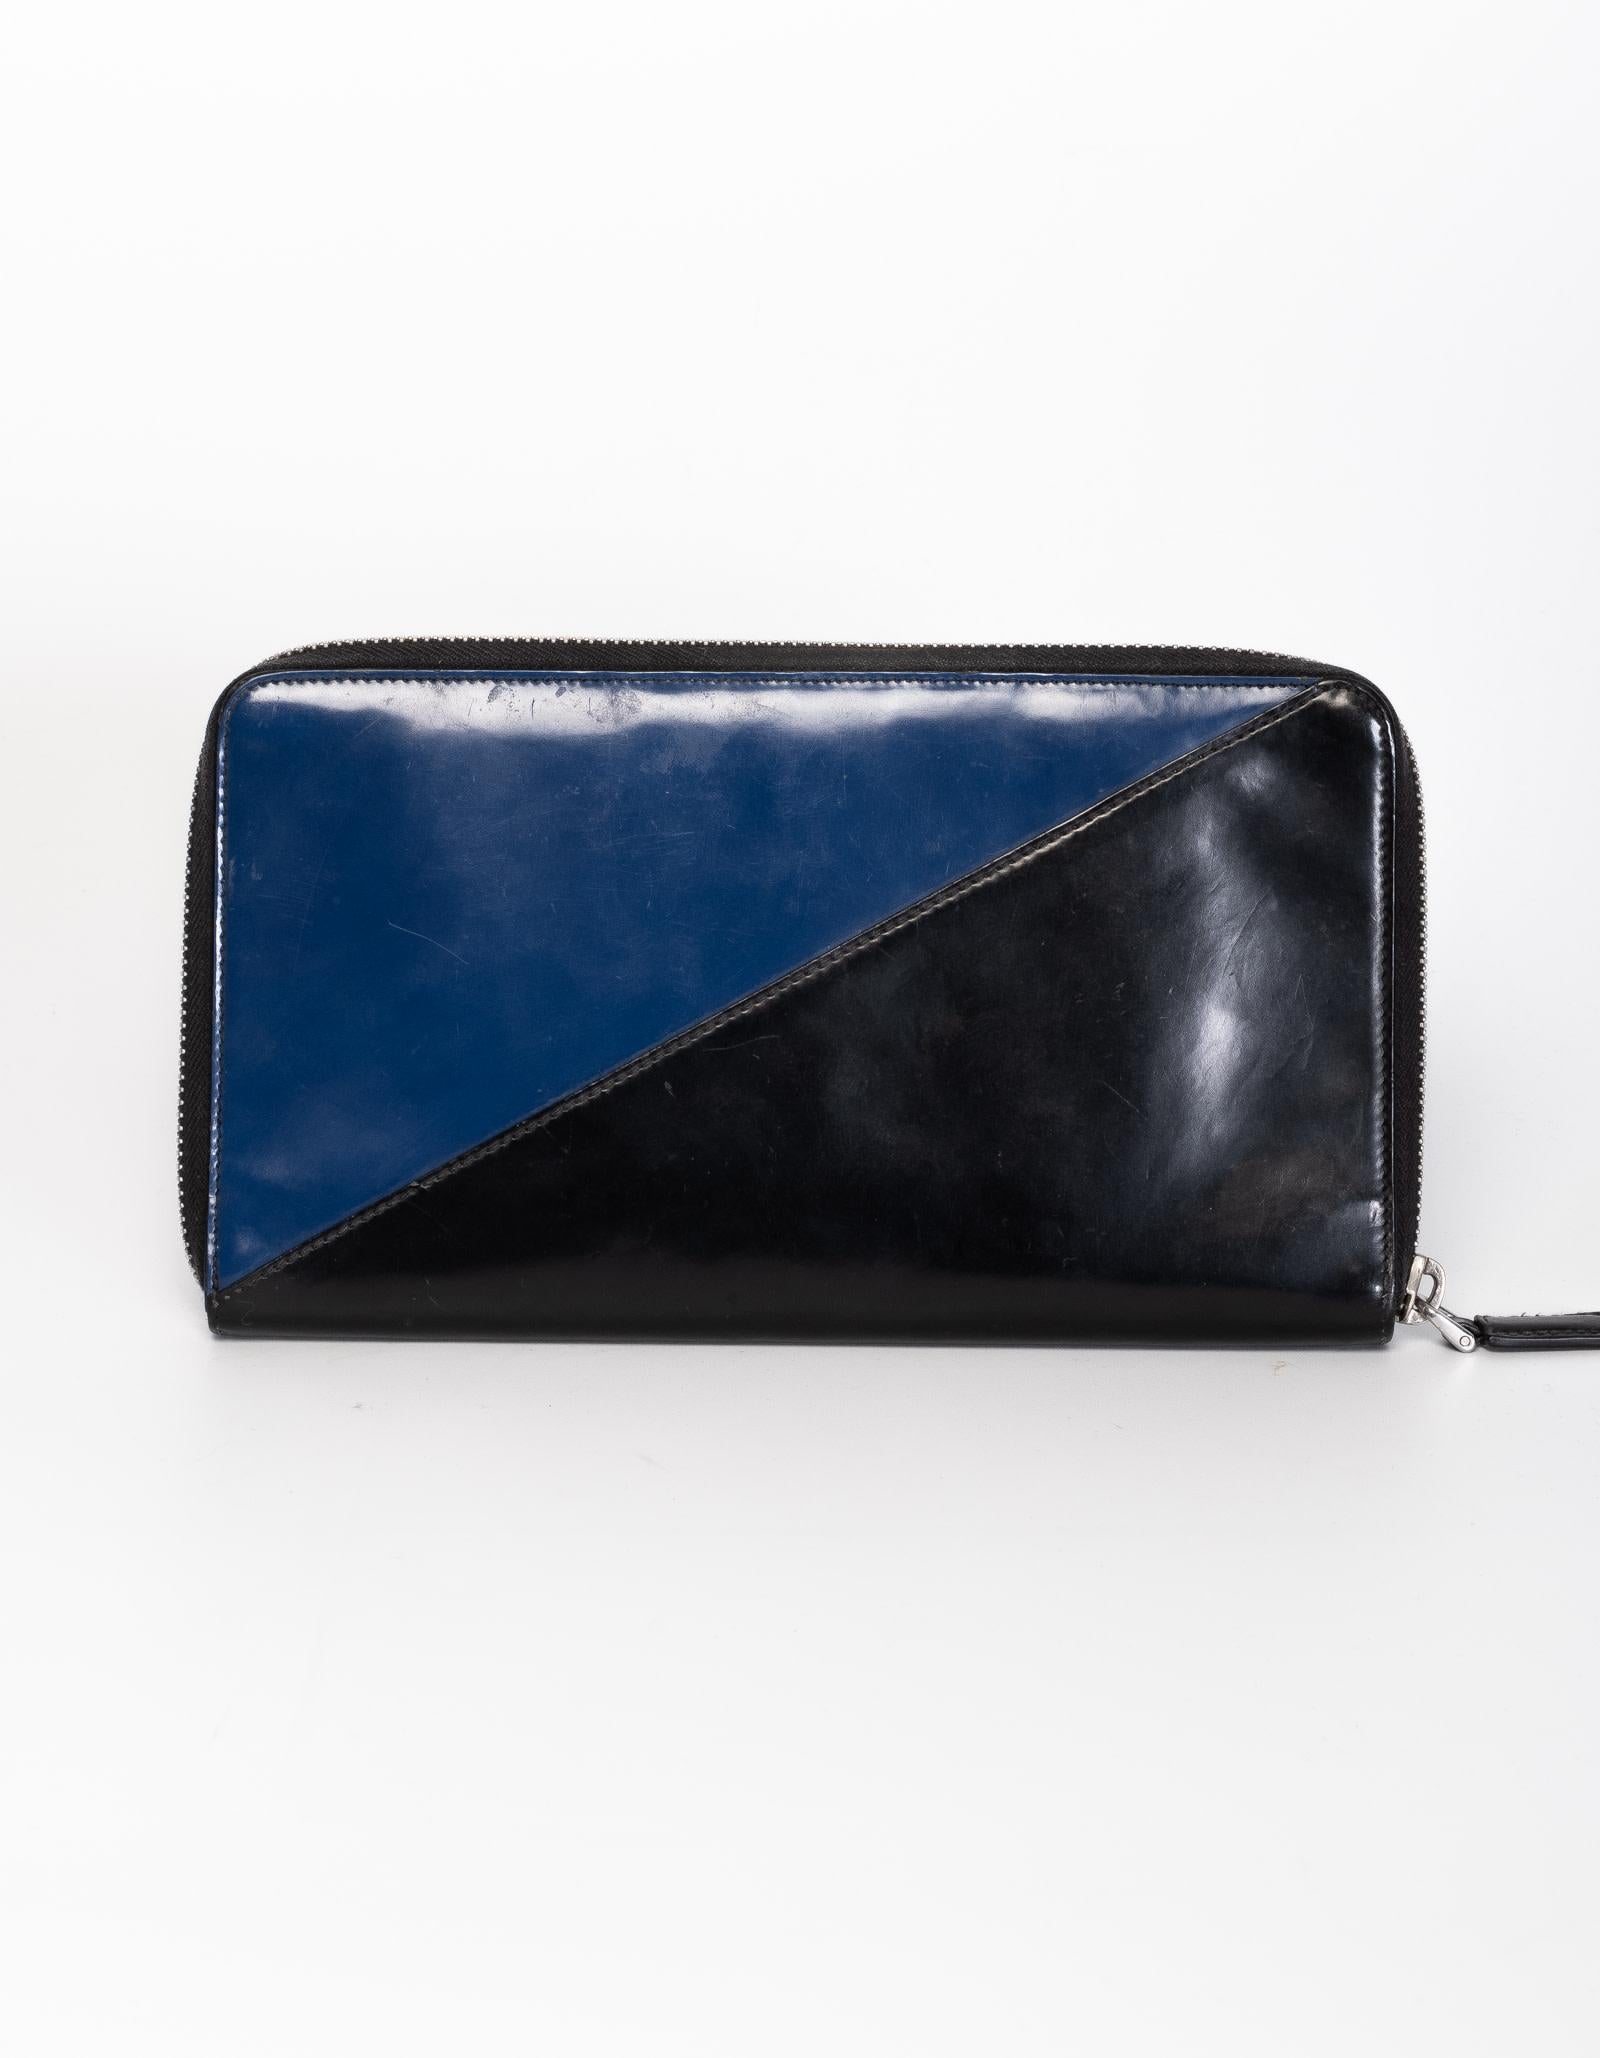 This Prada wallet features black and blue leather with zip around closure and interior with mini card slots.

COLOR: Black and blue
MATERIAL: Leather 
MEASURES: H 9” x L 4.5” x D .5”
COMES WITH: Dust bag
CONDITION: Good - wallet shows signs of wear